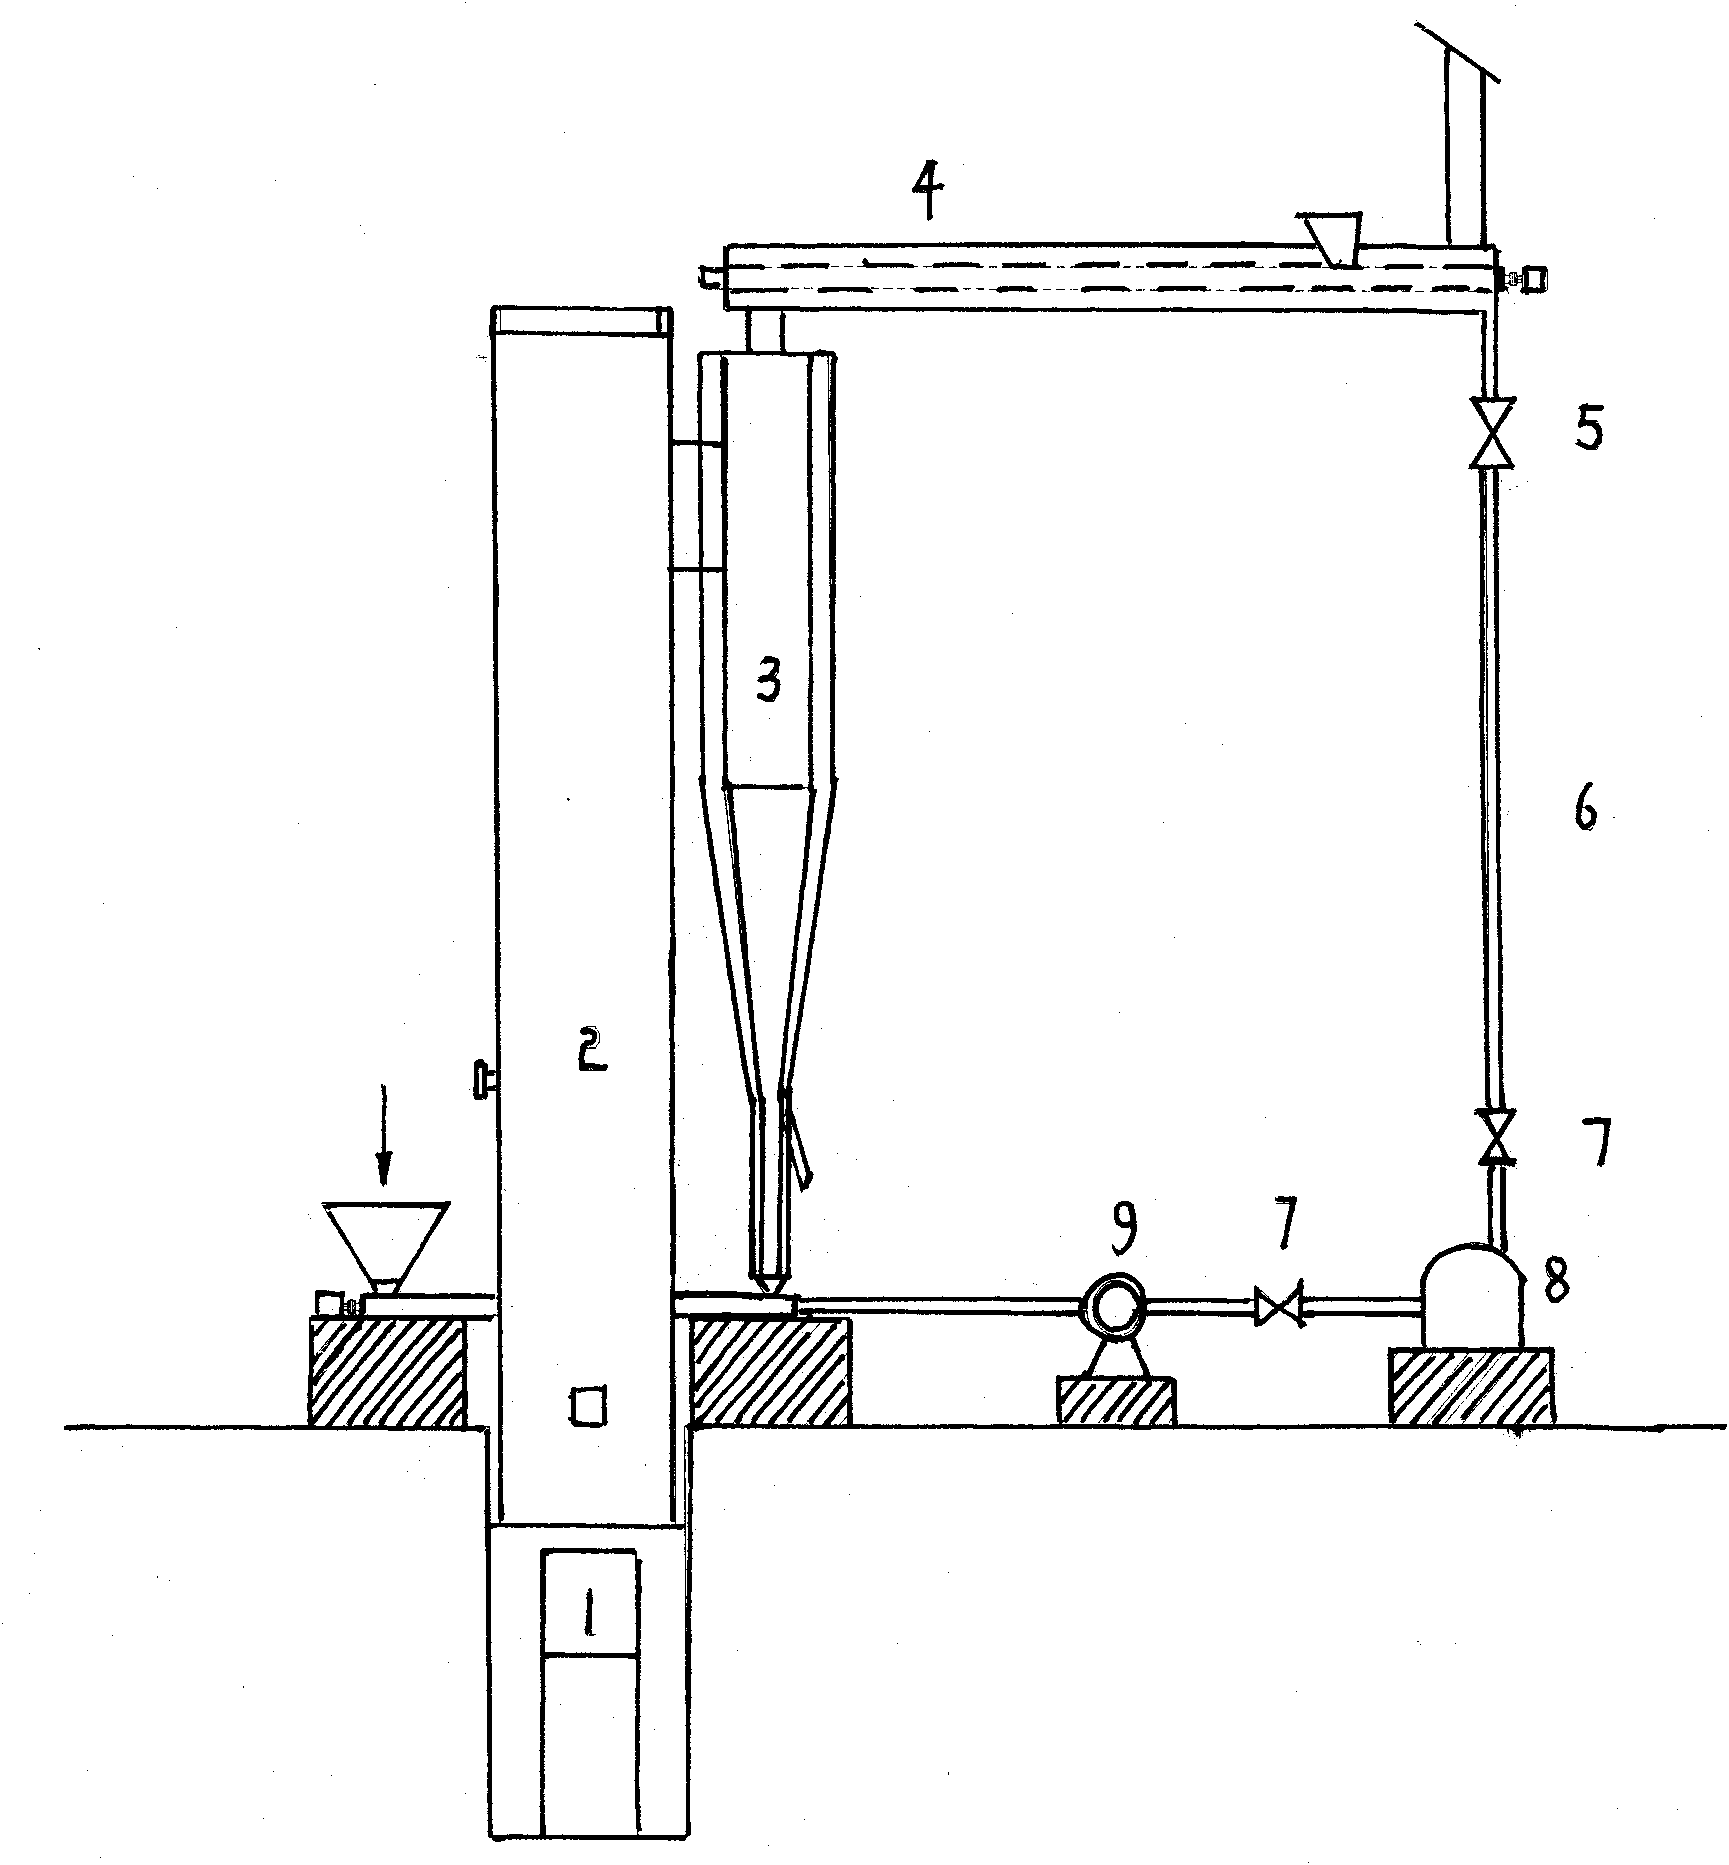 Device and method for comprehensively utilizing heat produced by decomposition of phosphorous gypsum in circulating fluid bed